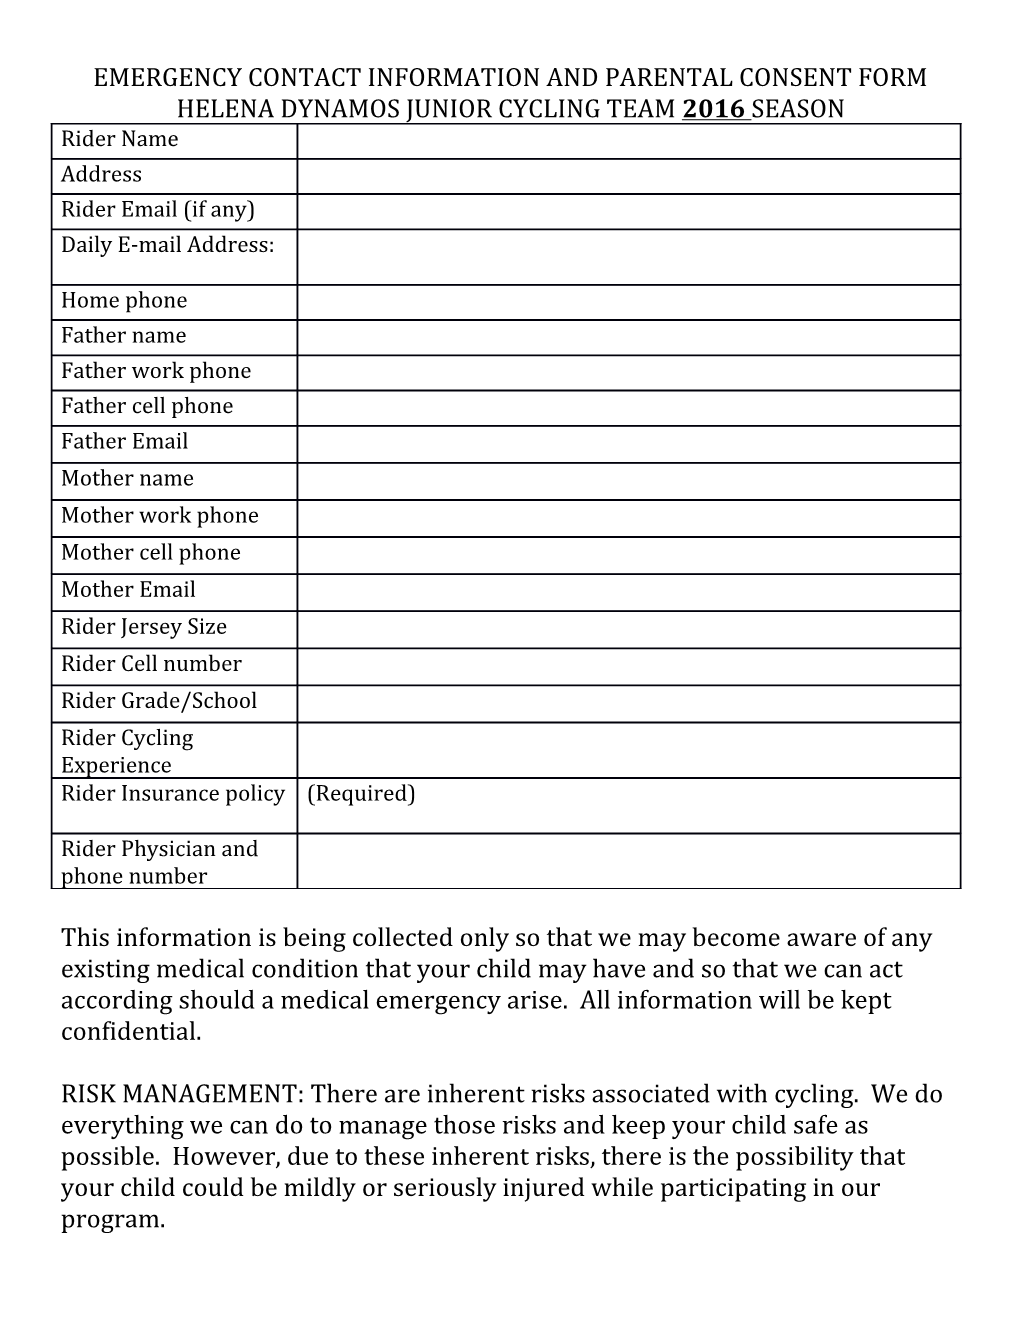 Emergency Contact Information and Parental Consent Form